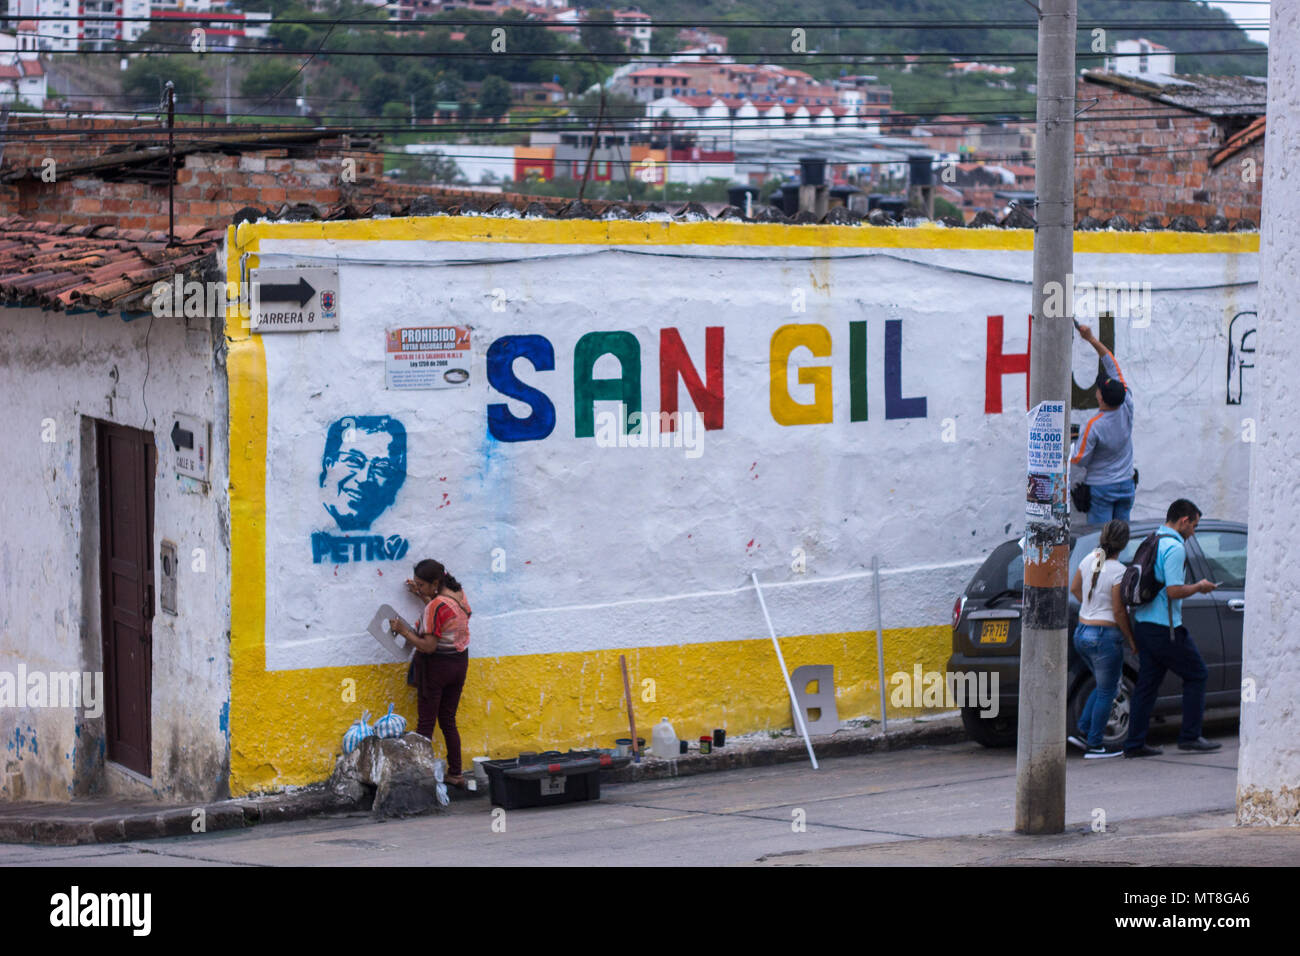 San Gil, Santander / Colombia - 28 april 2018 : Supporters of candidate Petro painting on a wall. Stock Photo